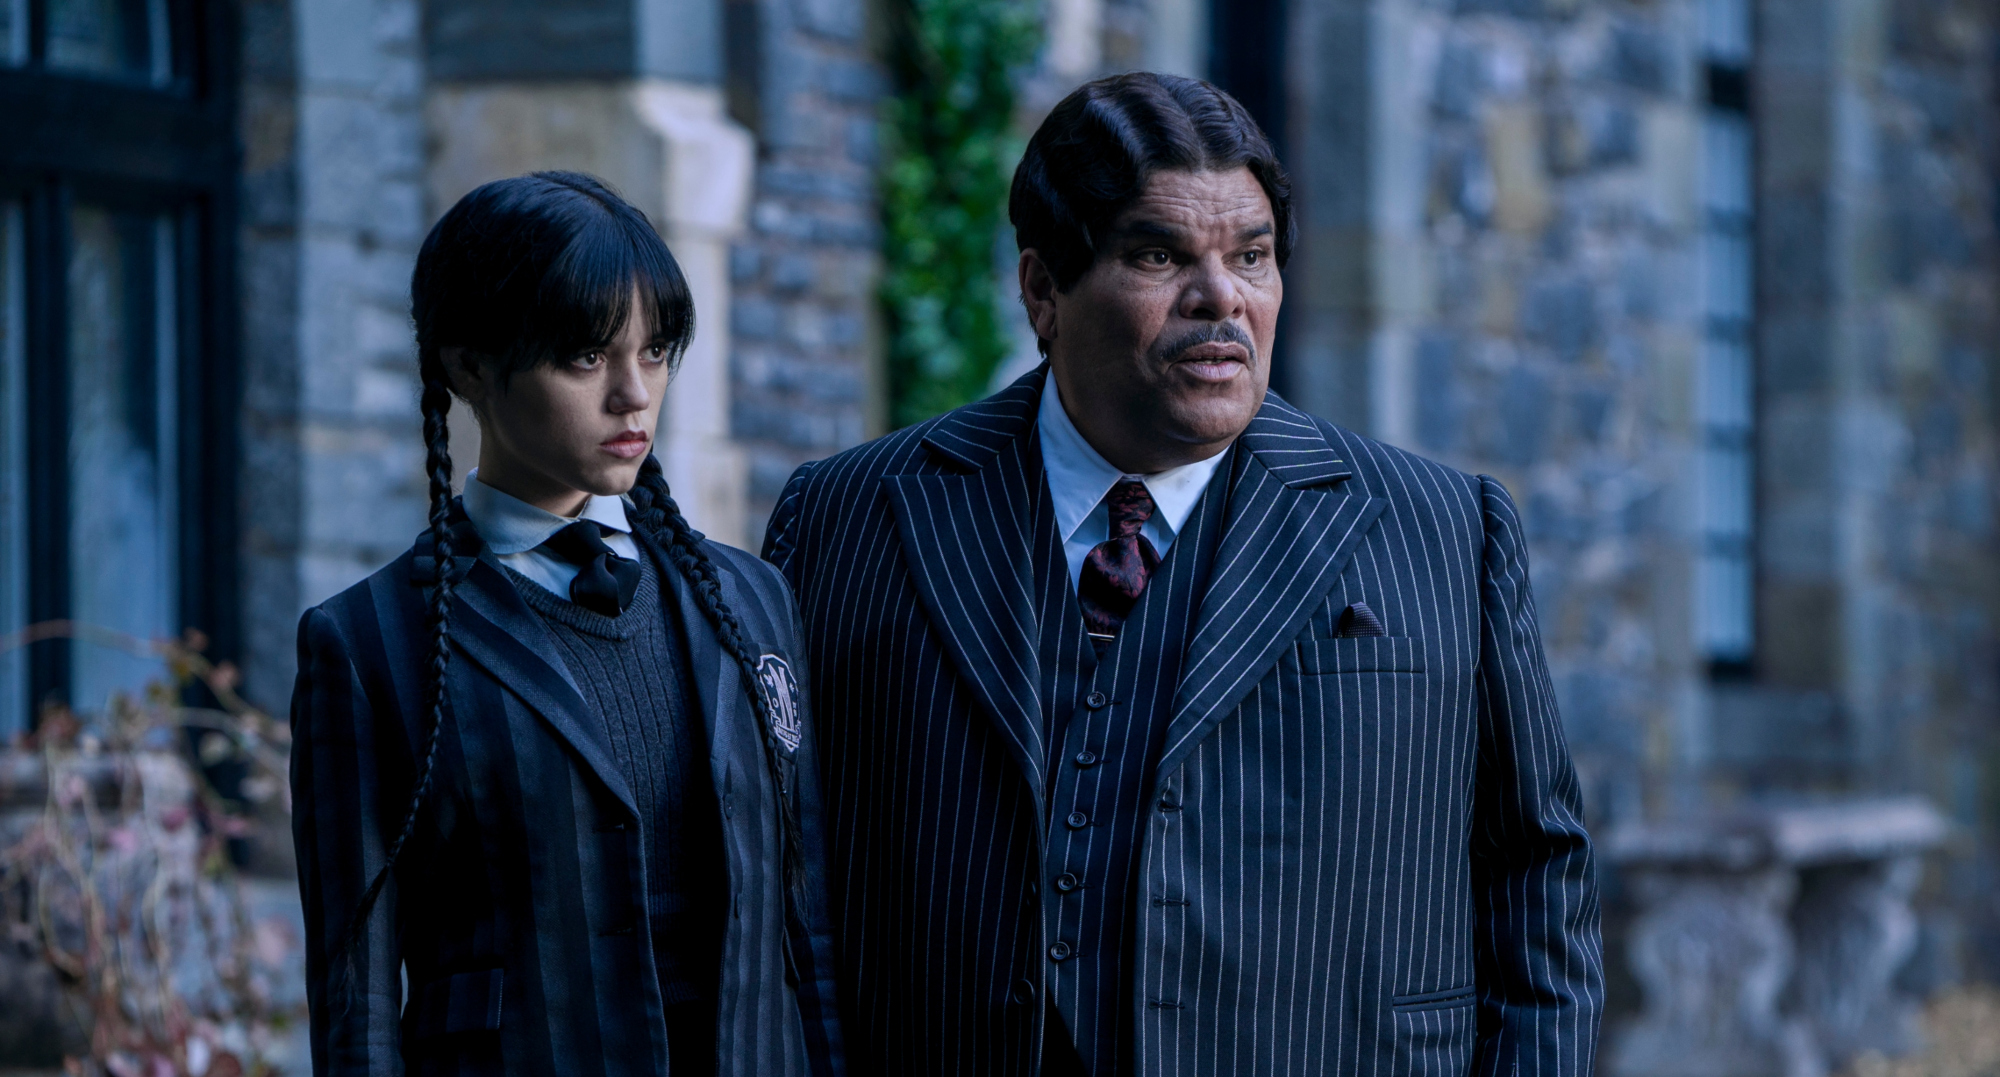 Jenna Ortega and Luis Guzmán in the Addams family series 'Wednesday'.